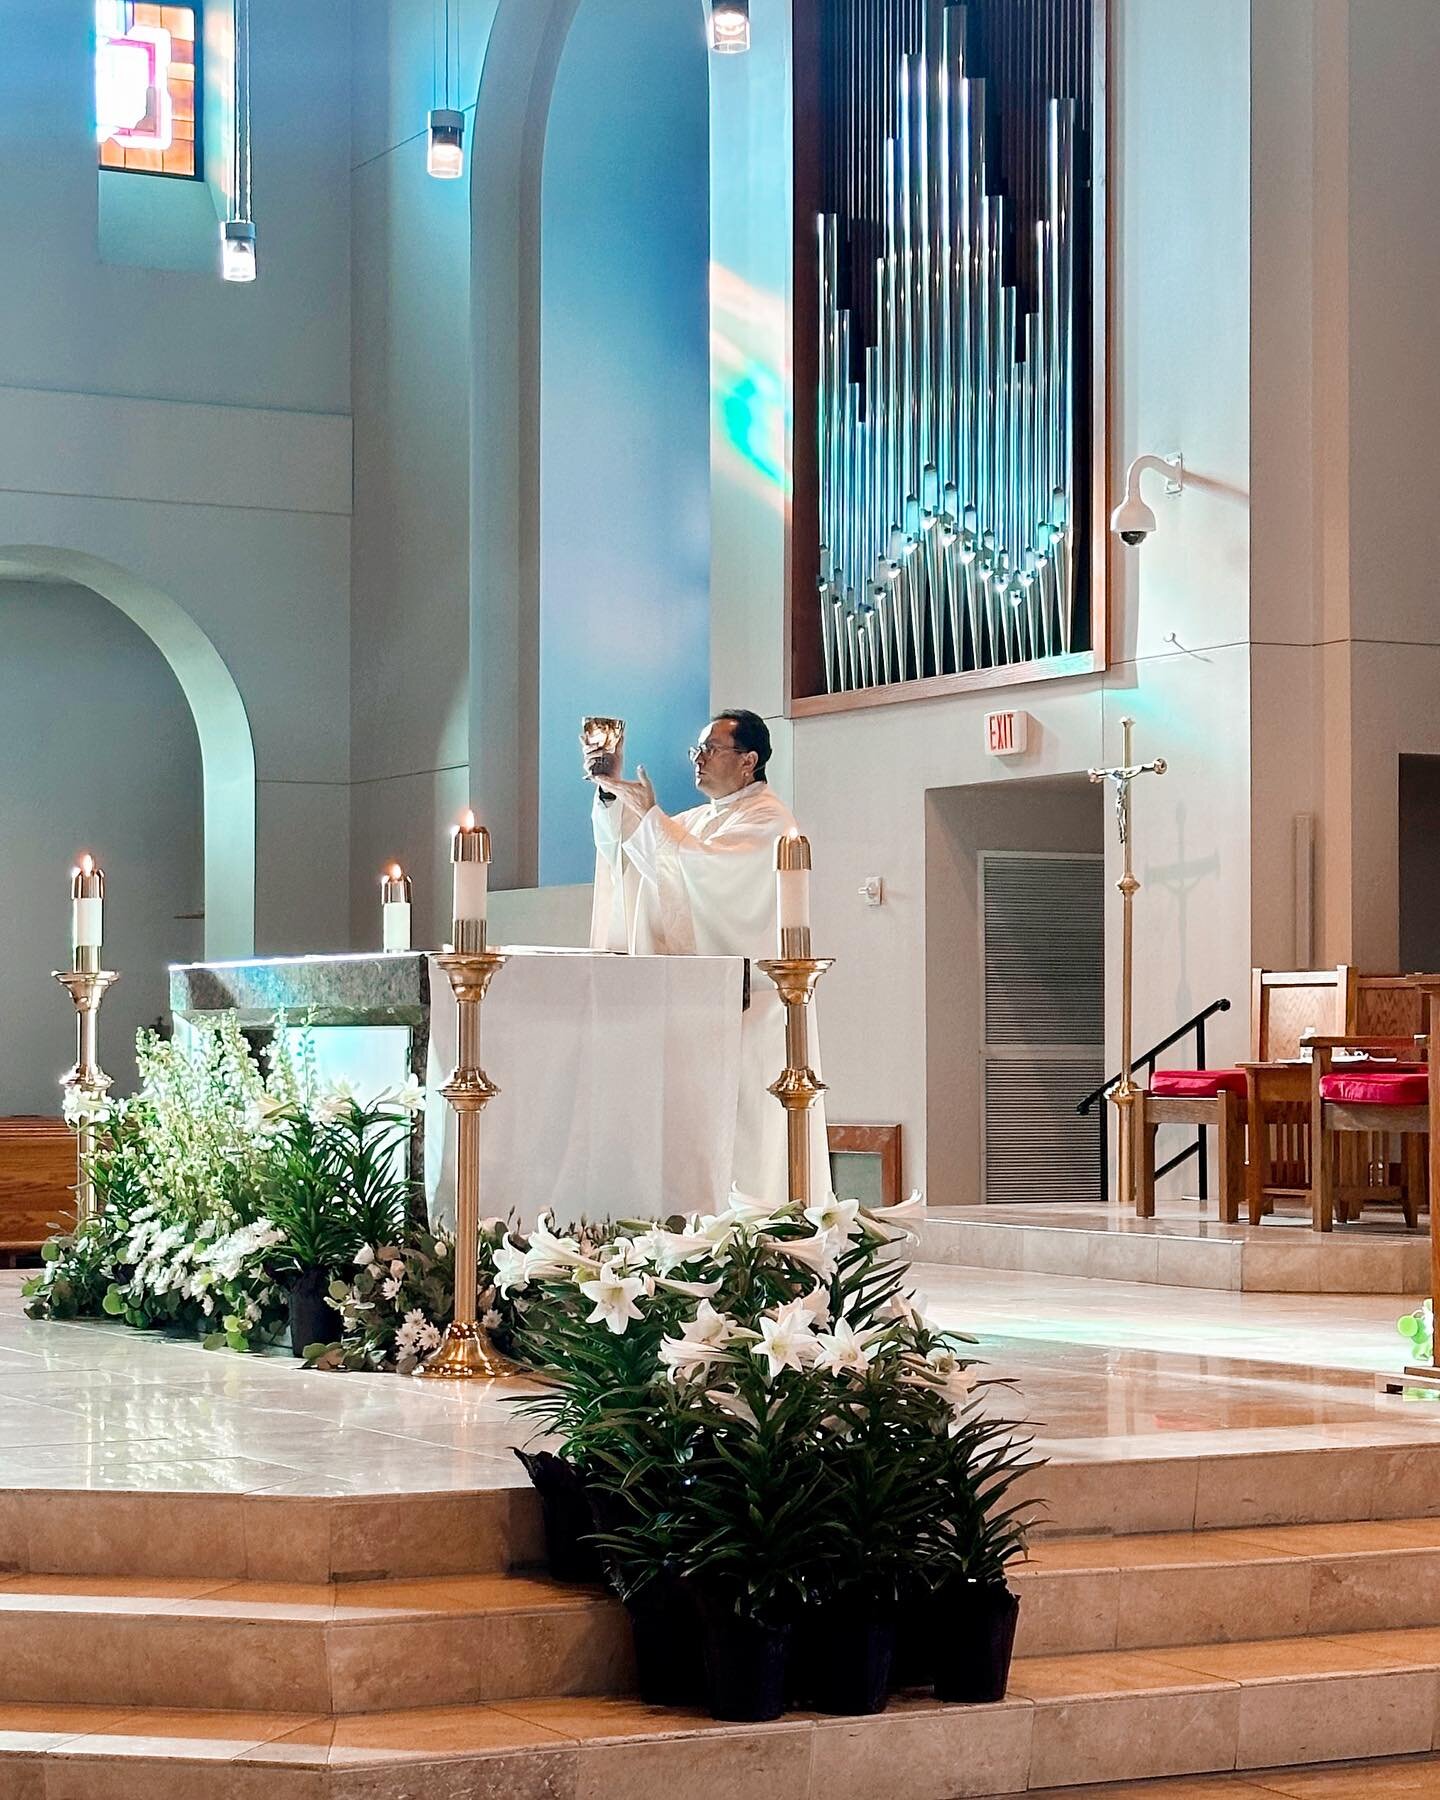 Congratulations to Father Ramiro! Yesterday he celebrated the 29th anniversary of his priestly ordination.